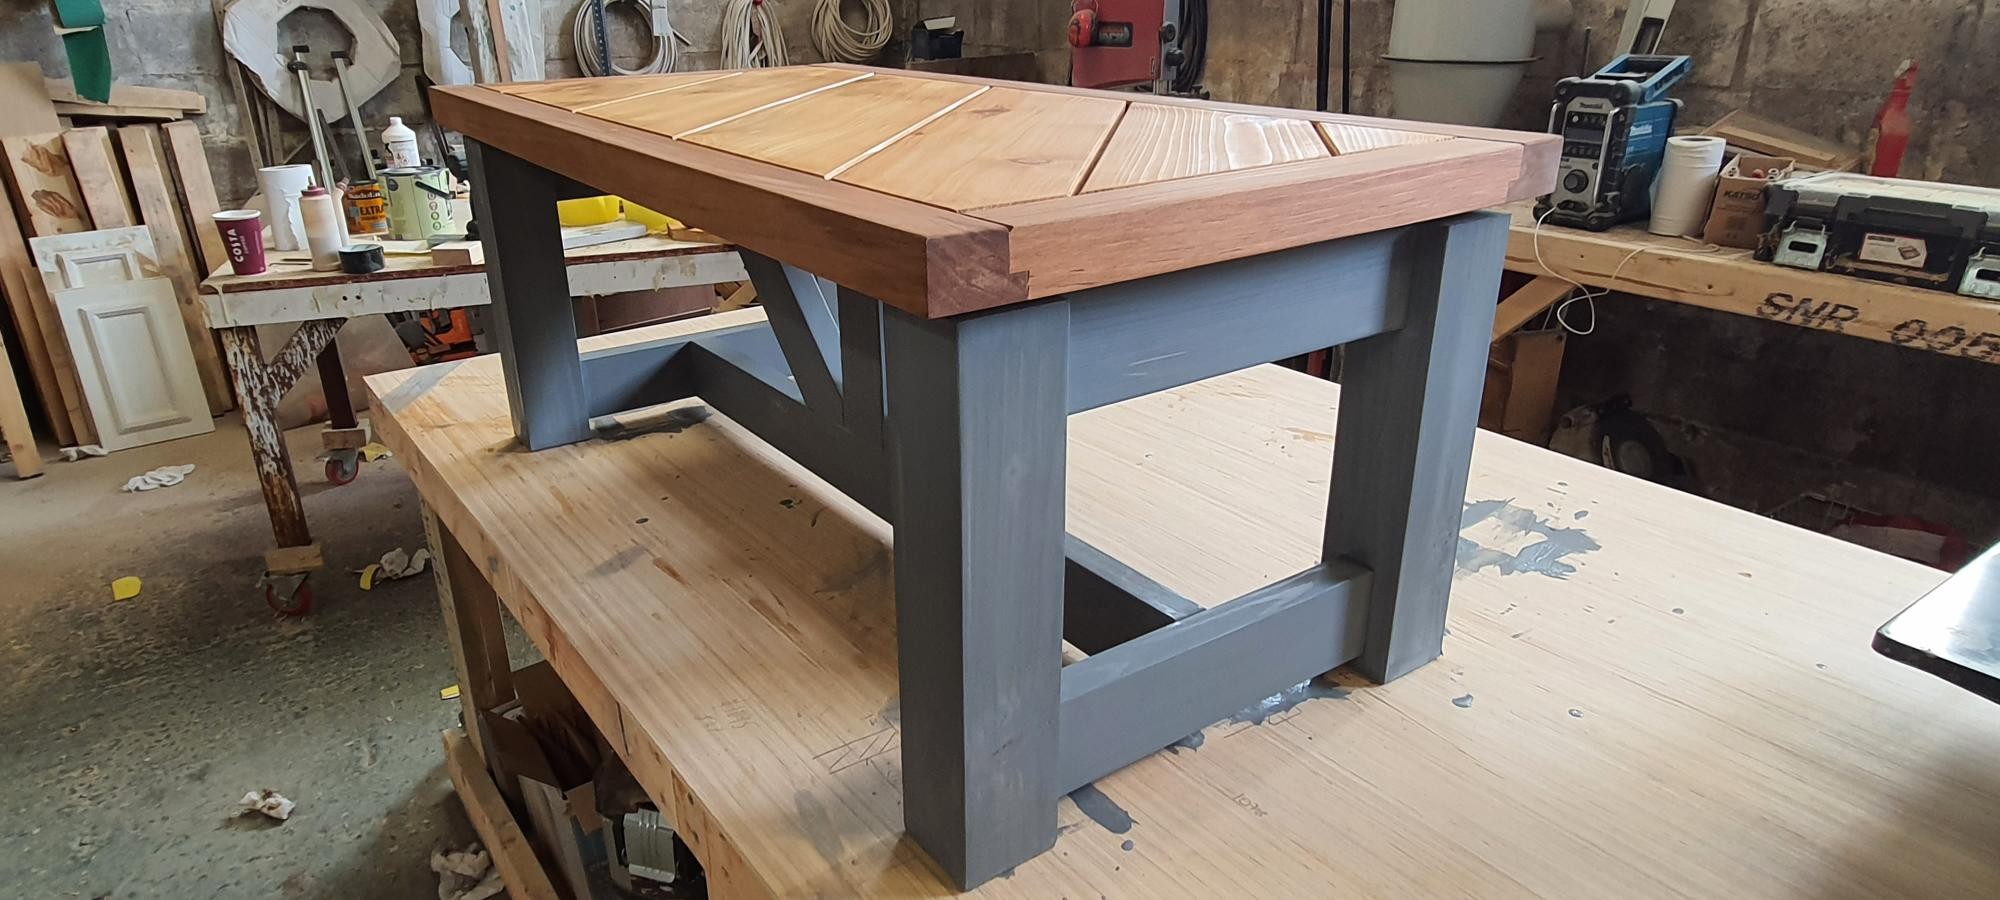 SJB Joinery